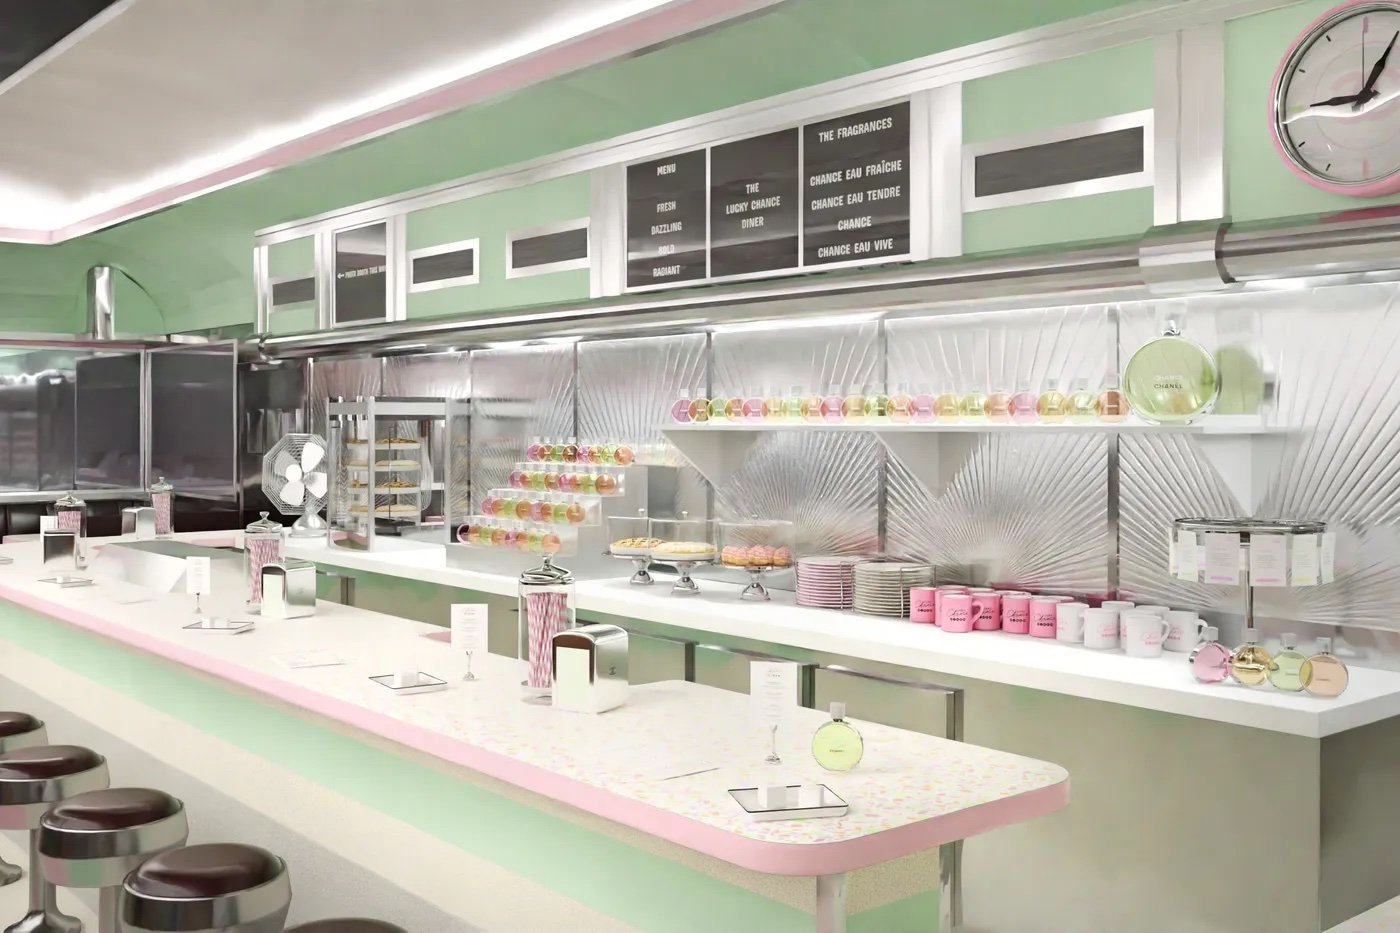 The inside of the Chanel’d out diner. Photo: Chanel